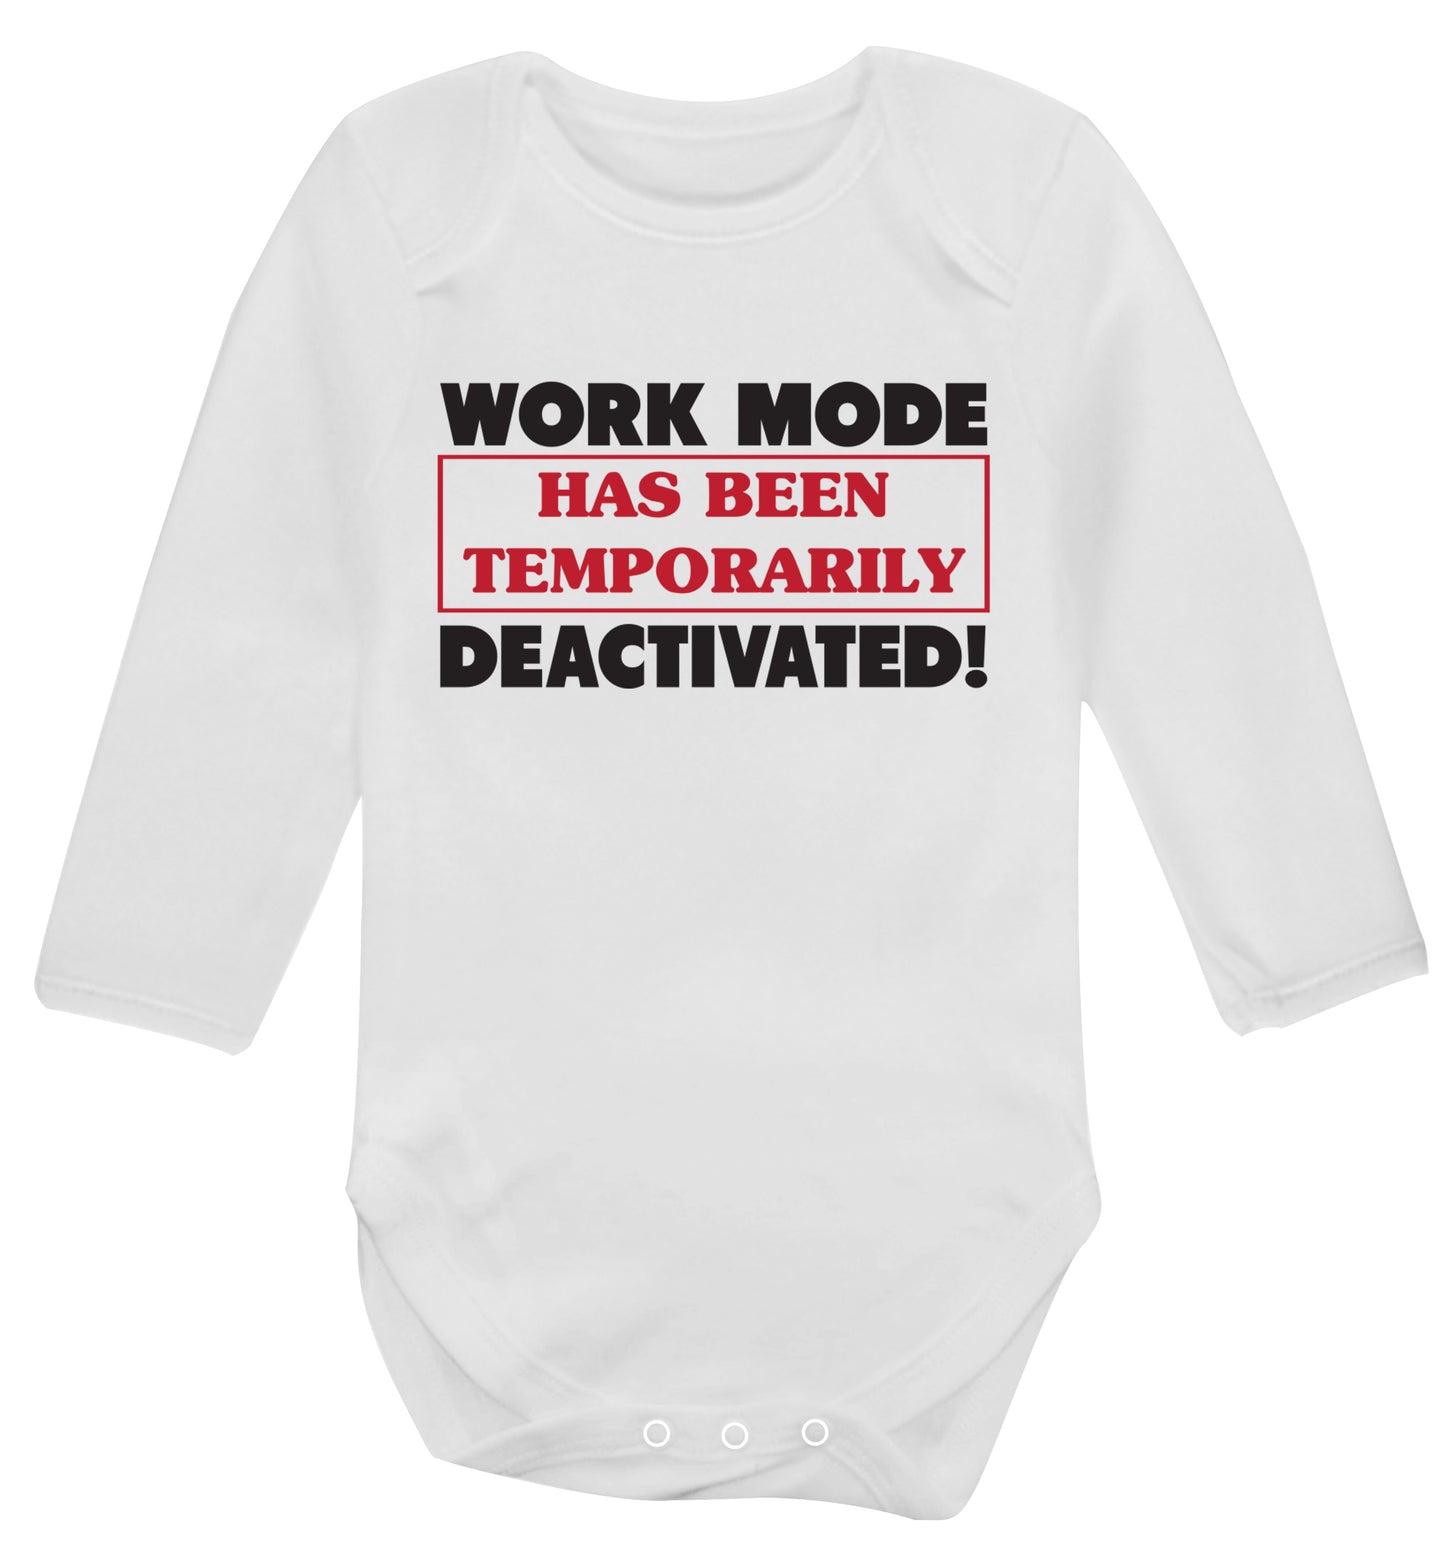 Work mode has now been temporarily deactivated Baby Vest long sleeved white 6-12 months